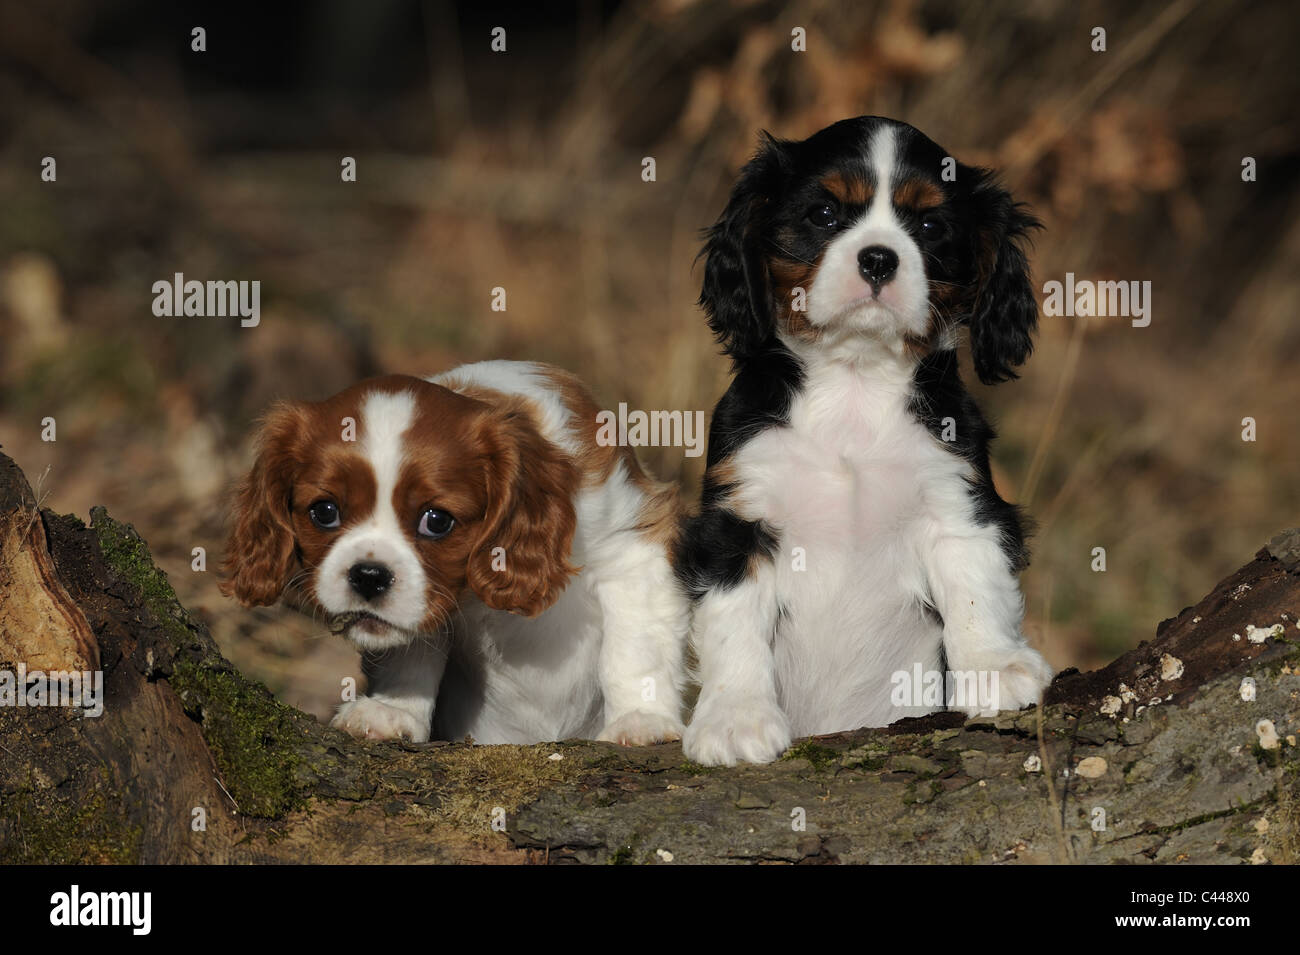 Cavalier King Charles Spaniel (Canis lupus familiaris), two puppies looking over a log. Stock Photo